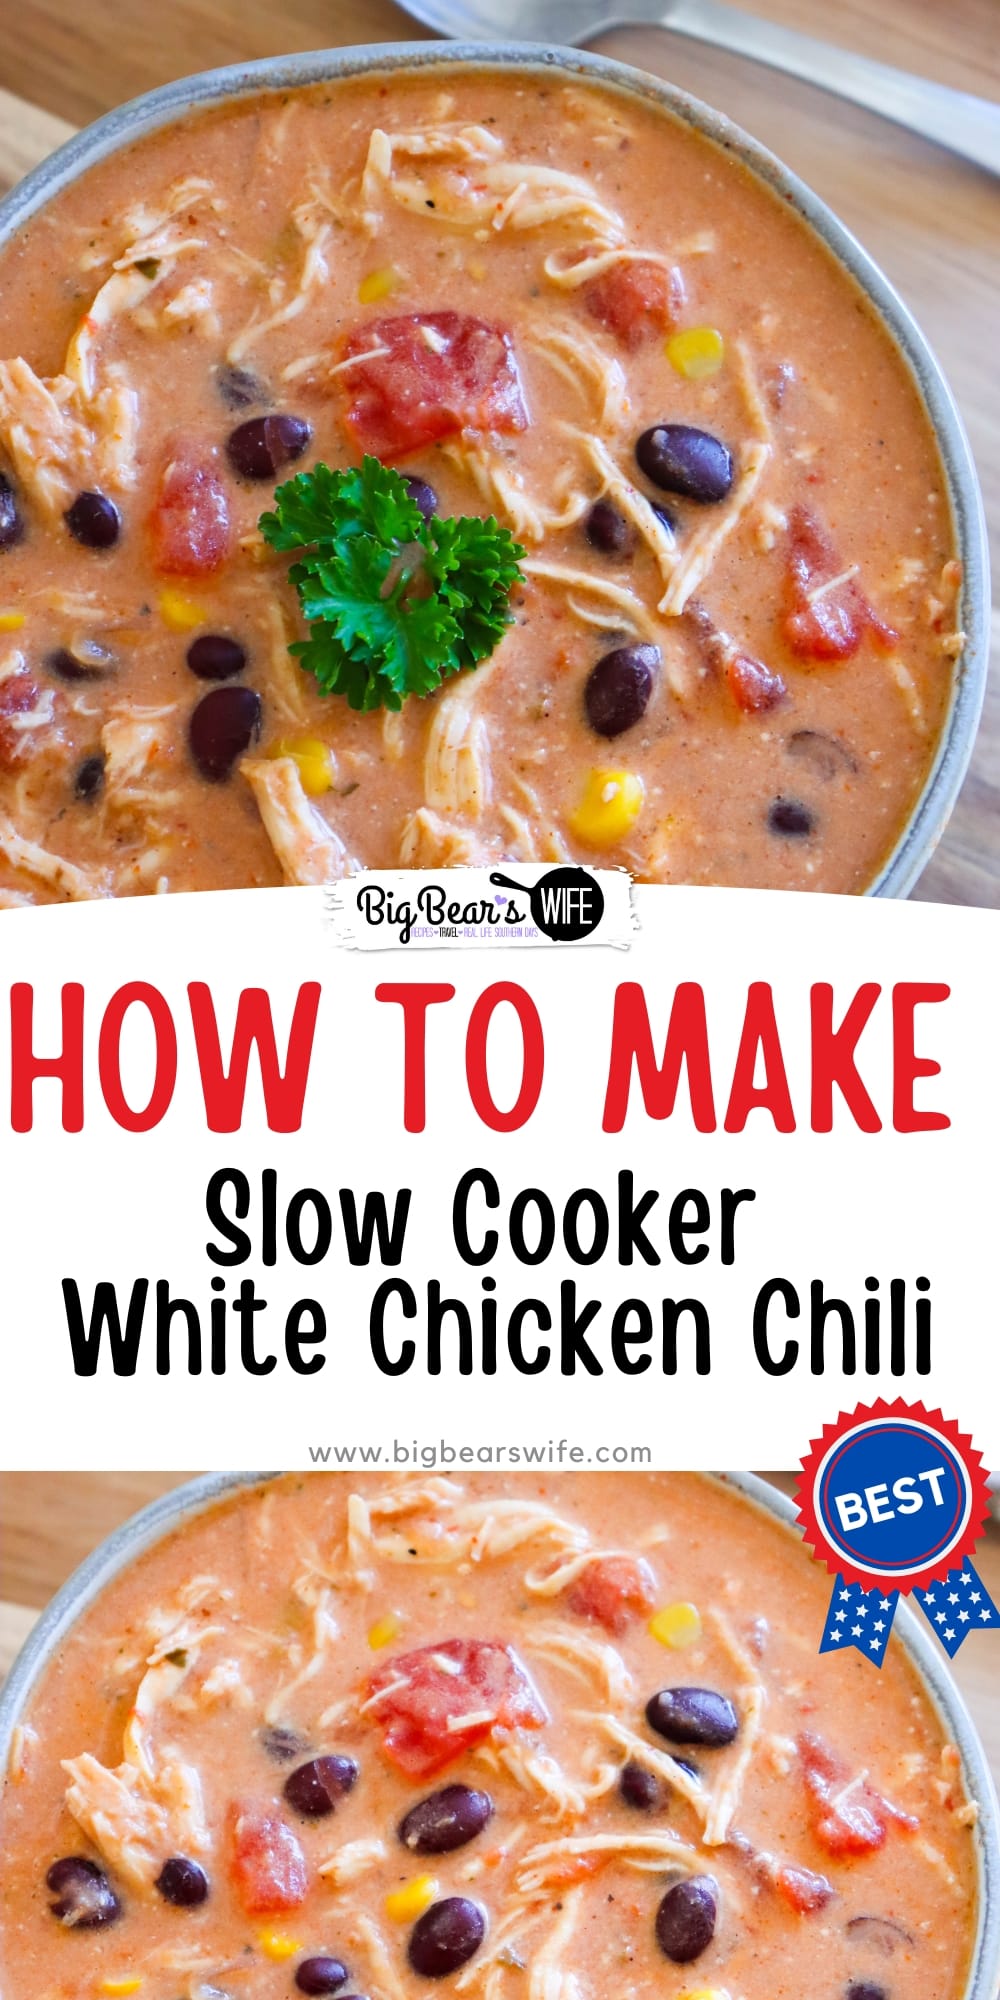 This White Chicken Chili is a recipe that my sister-in-law makes and we just love it! Perfect slow cooker meal that is easy to toss together and absolutely delicious!  via @bigbearswife